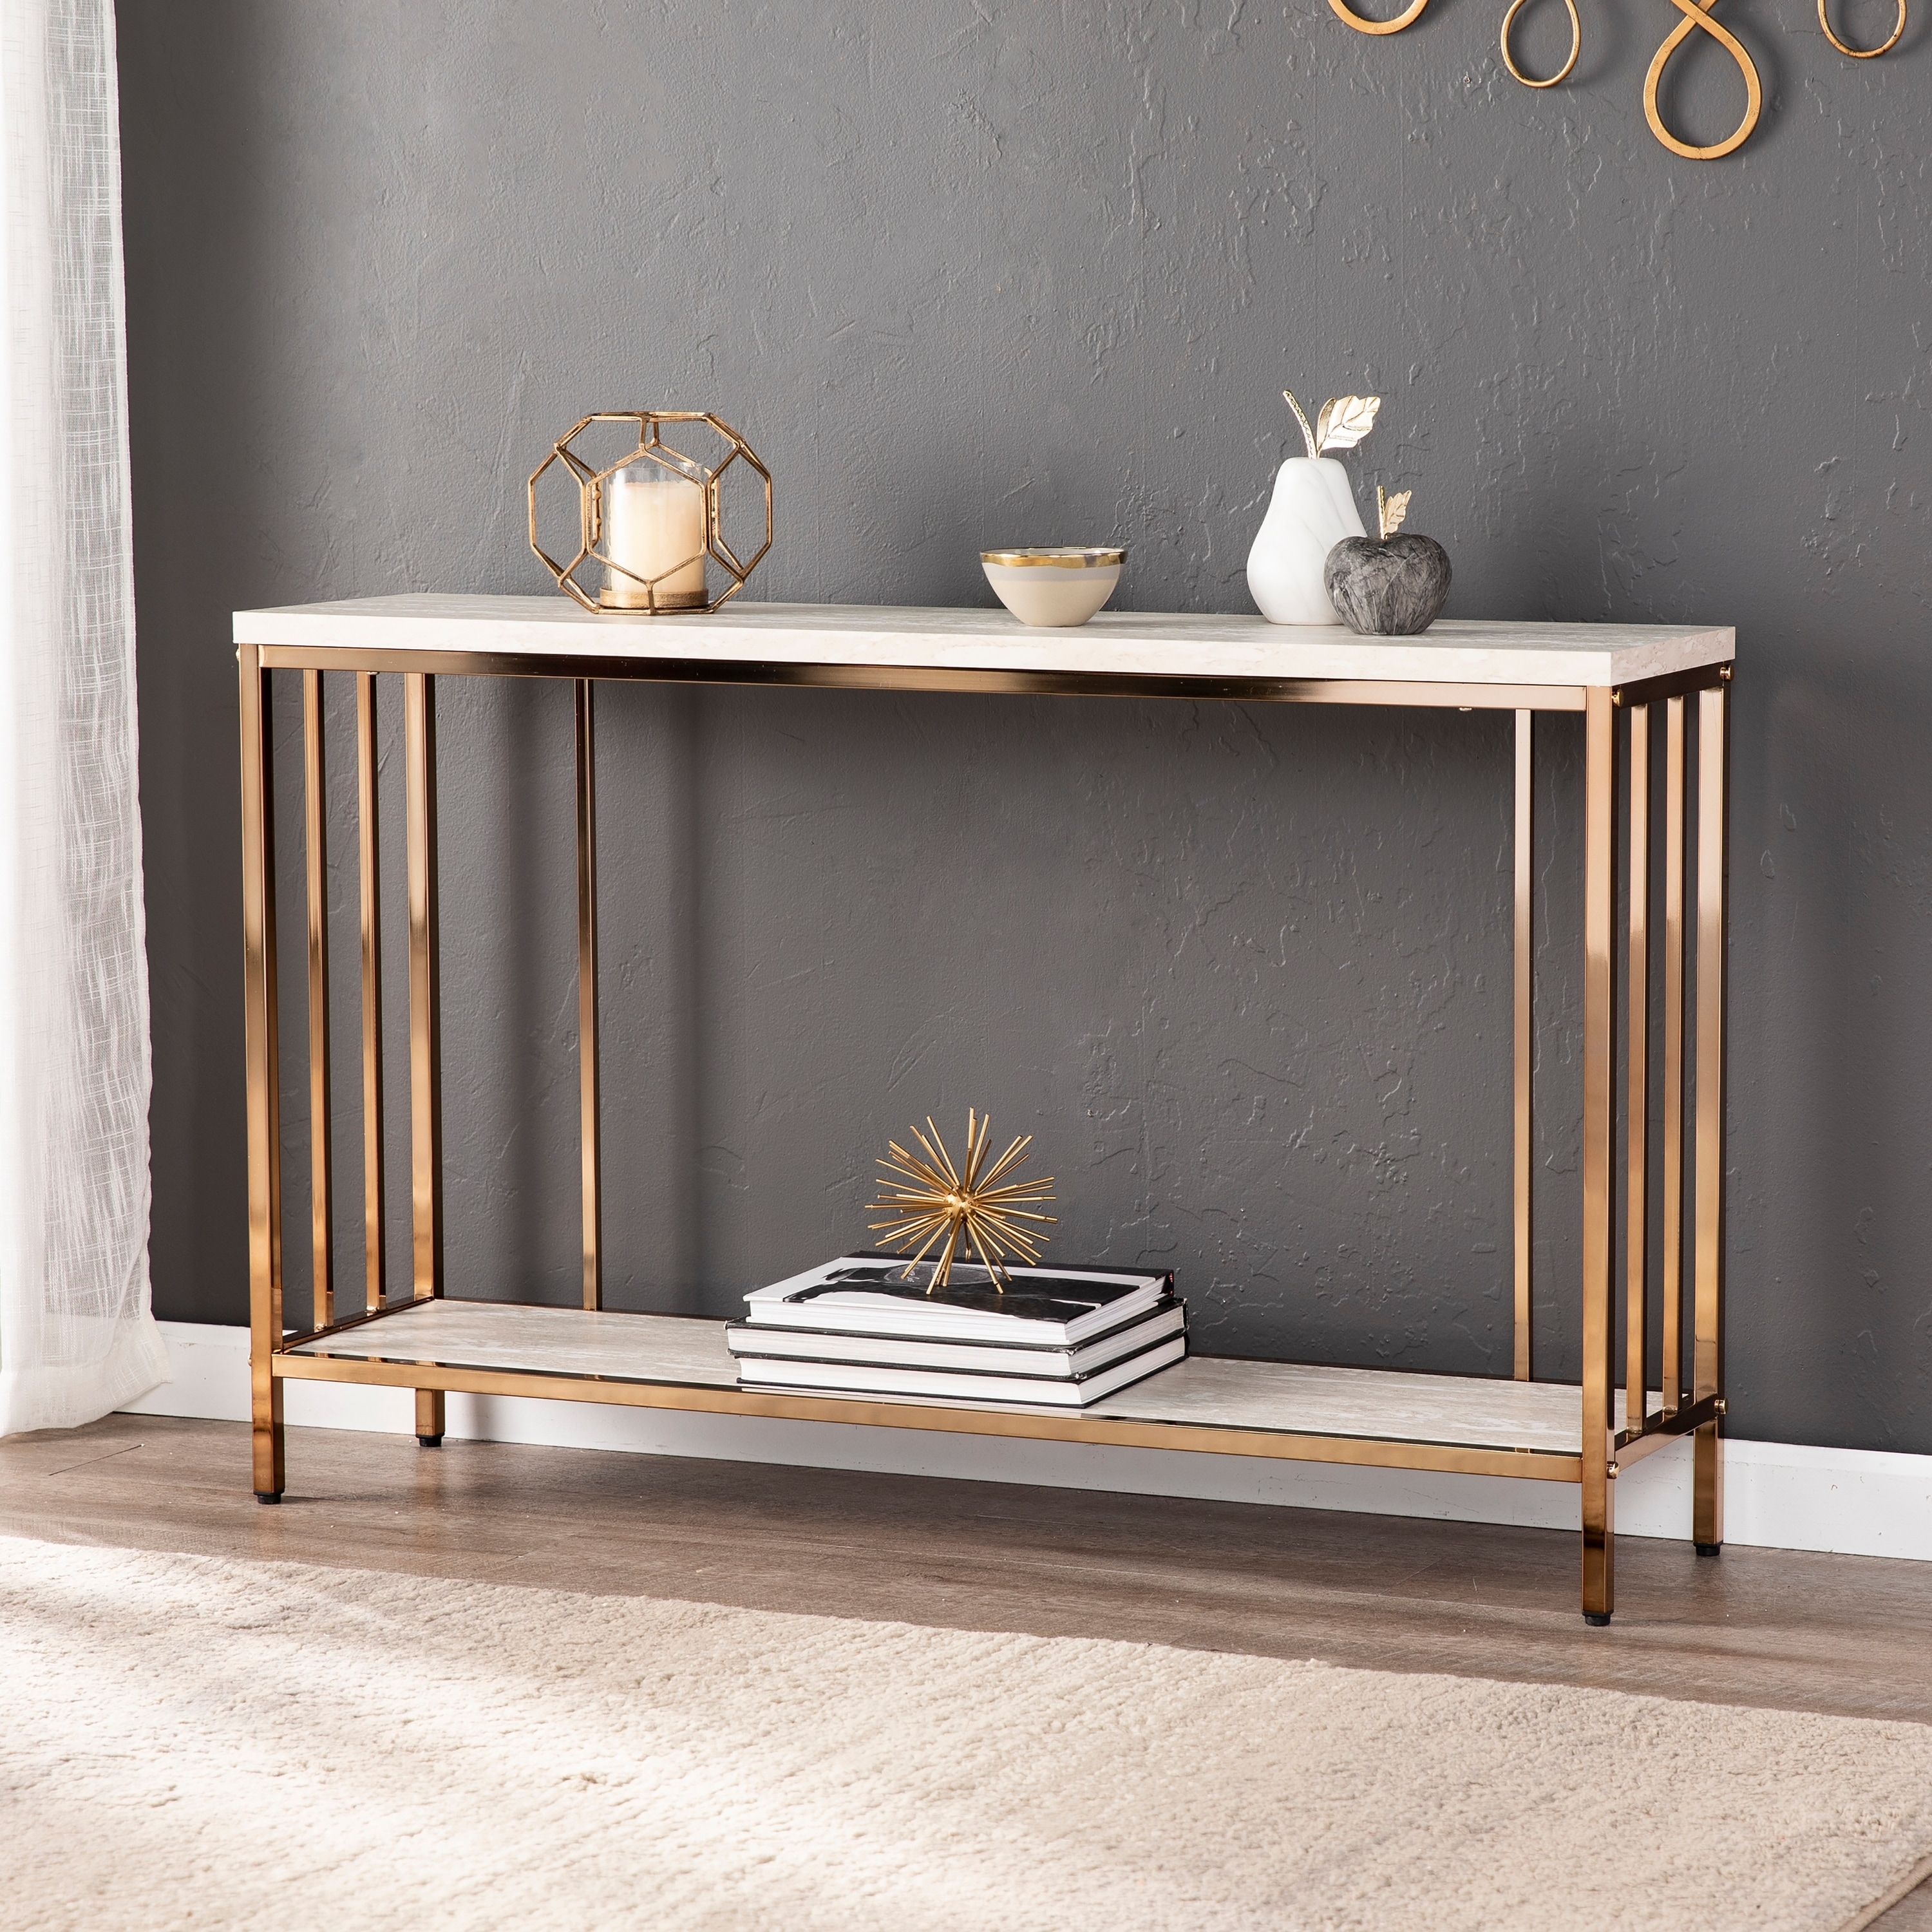 Silver Orchid Ham Faux Stone Console Table